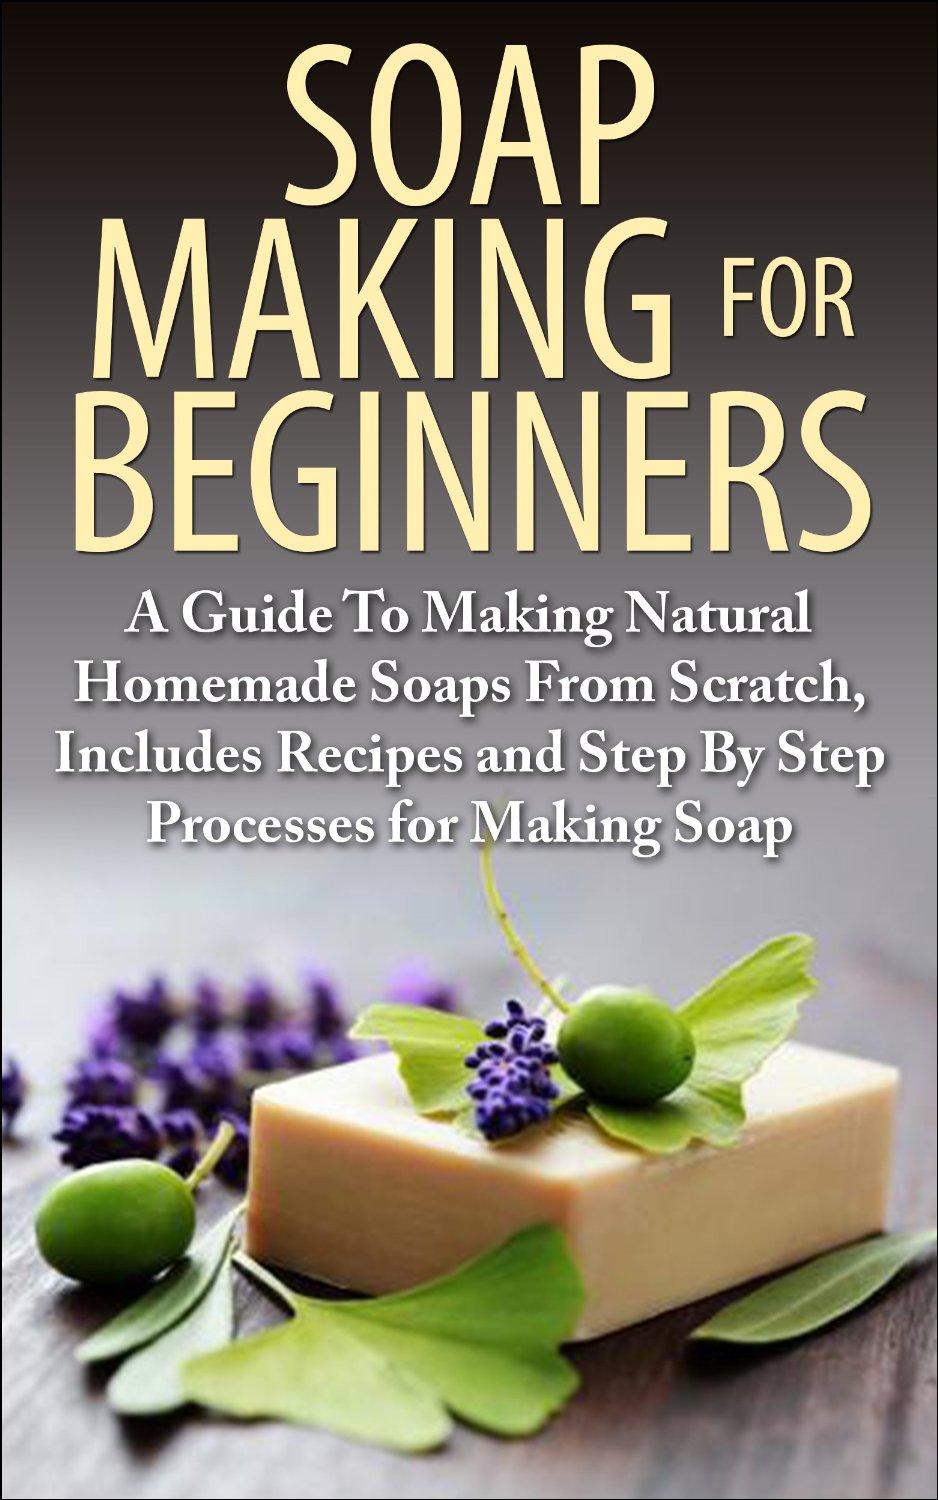 Soap Making for Beginners by Lindsey P